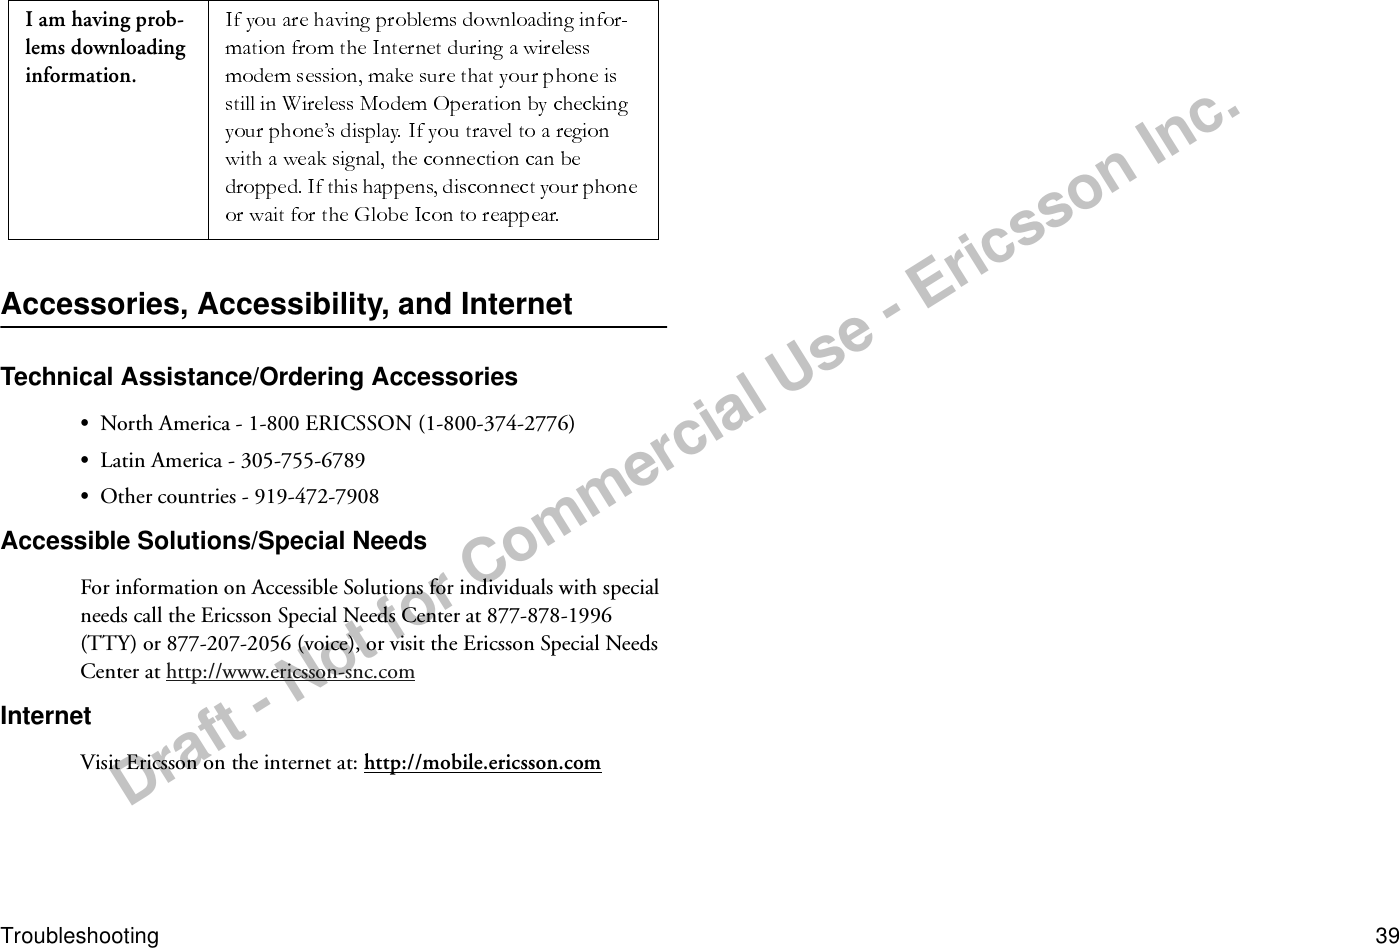 Draft - Not for Commercial Use - Ericsson Inc.Troubleshooting 39Accessories, Accessibility, and InternetTechnical Assistance/Ordering Accessories•North America - 1-800 ERICSSON (1-800-374-2776)•Latin America - 305-755-6789•Other countries - 919-472-7908Accessible Solutions/Special NeedsFor information on Accessible Solutions for individuals with special needs call the Ericsson Special Needs Center at 877-878-1996 (TTY) or 877-207-2056 (voice), or visit the Ericsson Special Needs Center at http://www.ericsson-snc.comInternetVisit Ericsson on the internet at: http://mobile.ericsson.comI am having prob-lems downloading information.